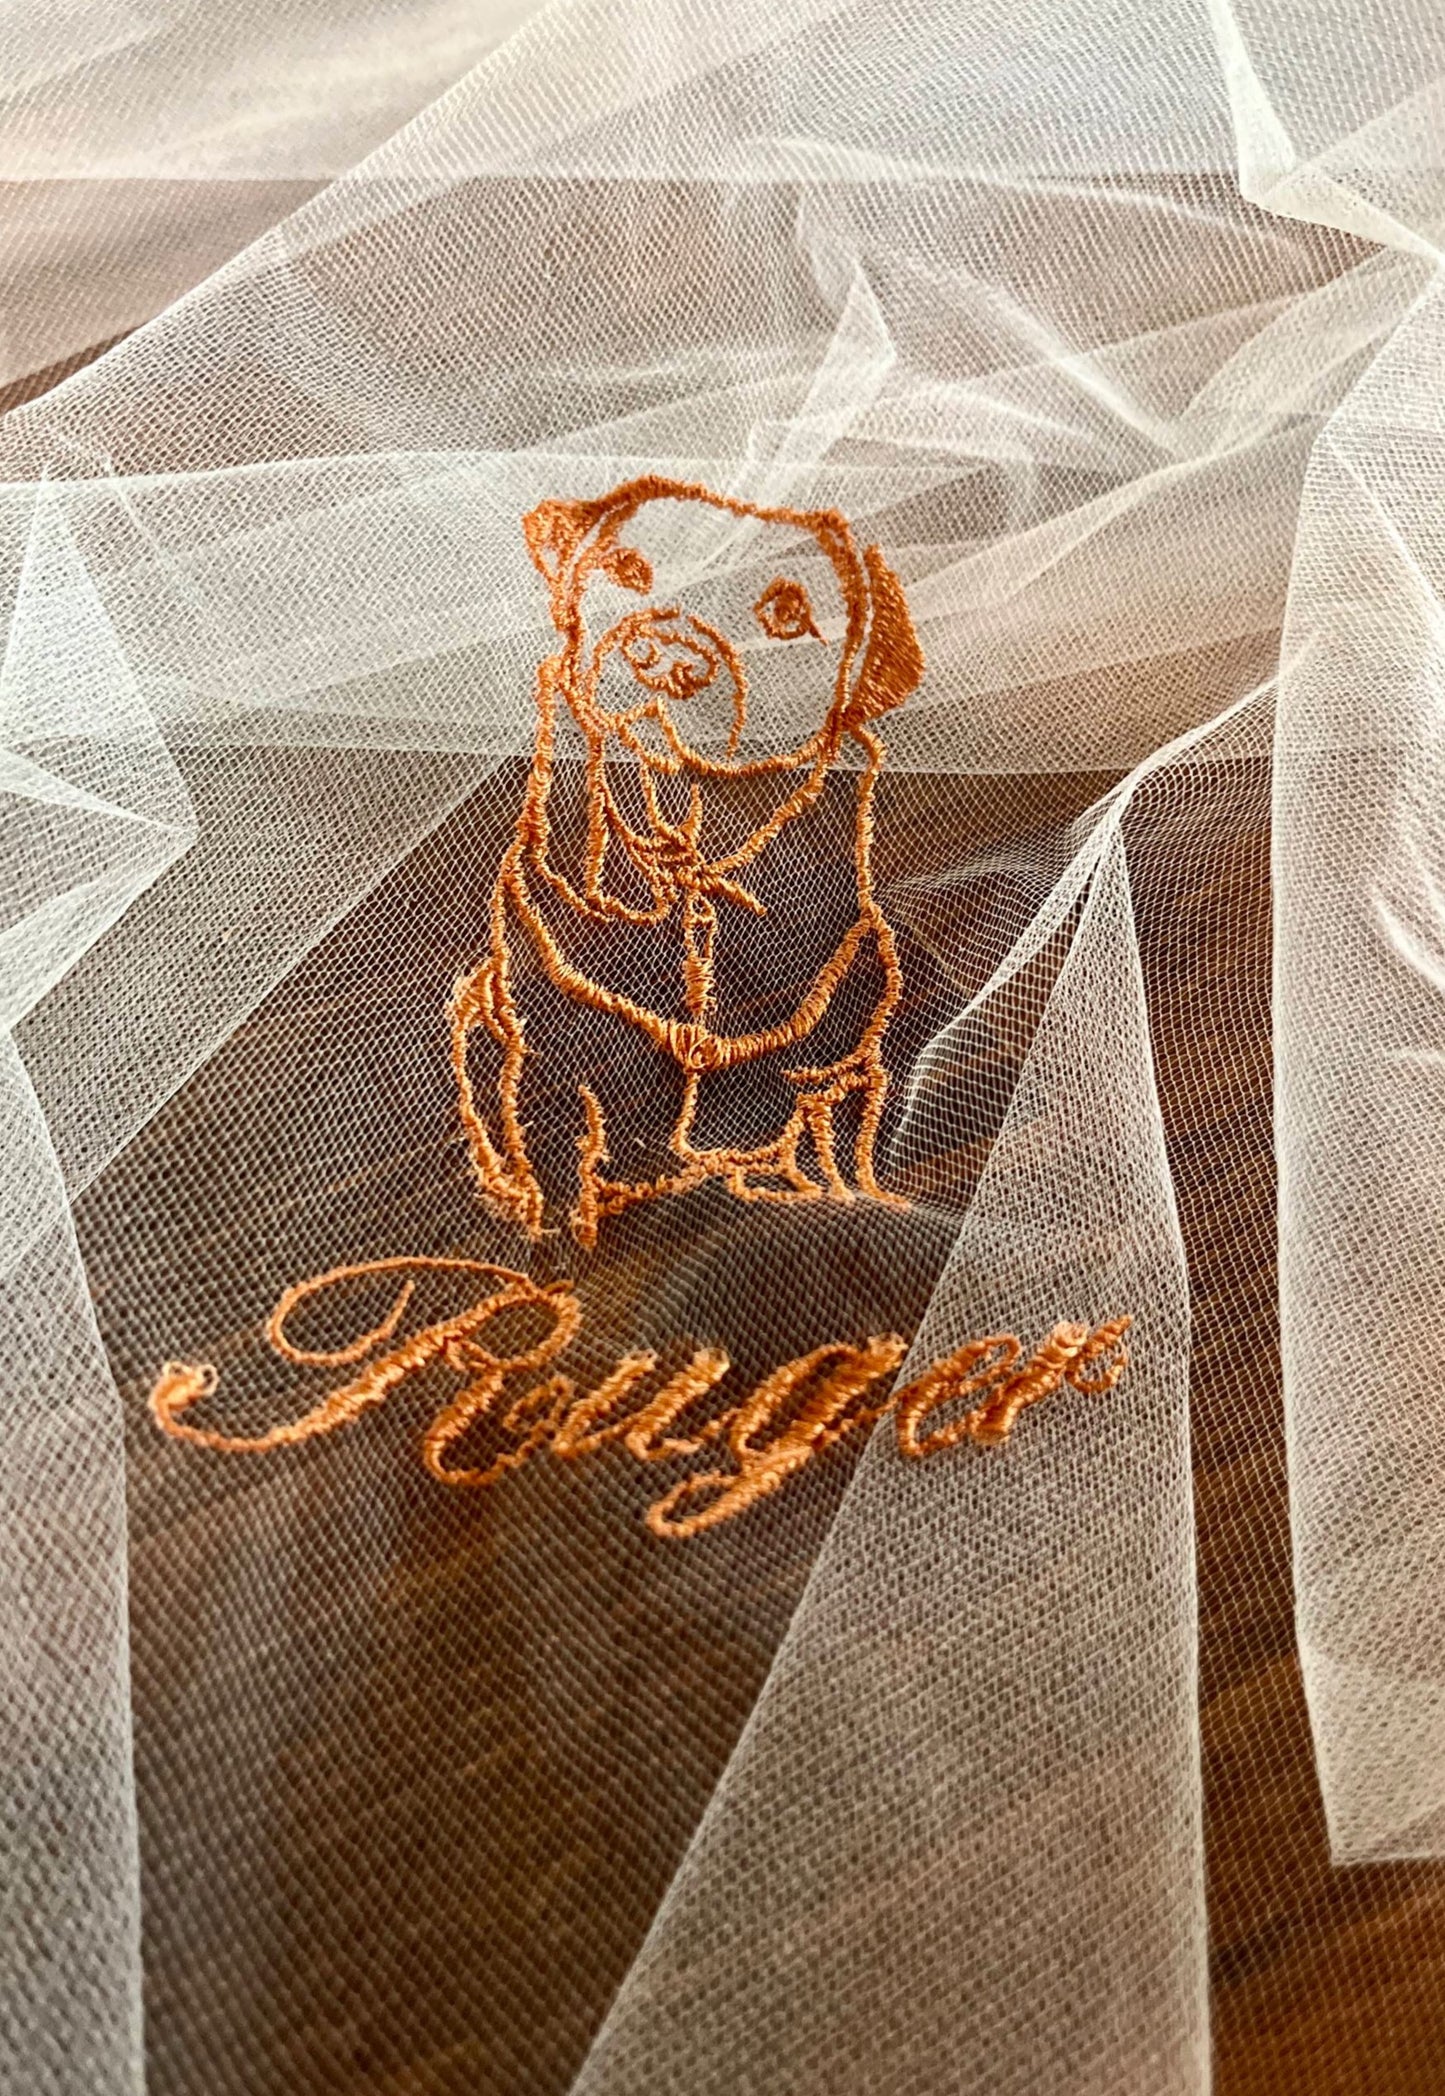 English lab embroidery portrait on wedding veil with pet's name in script text